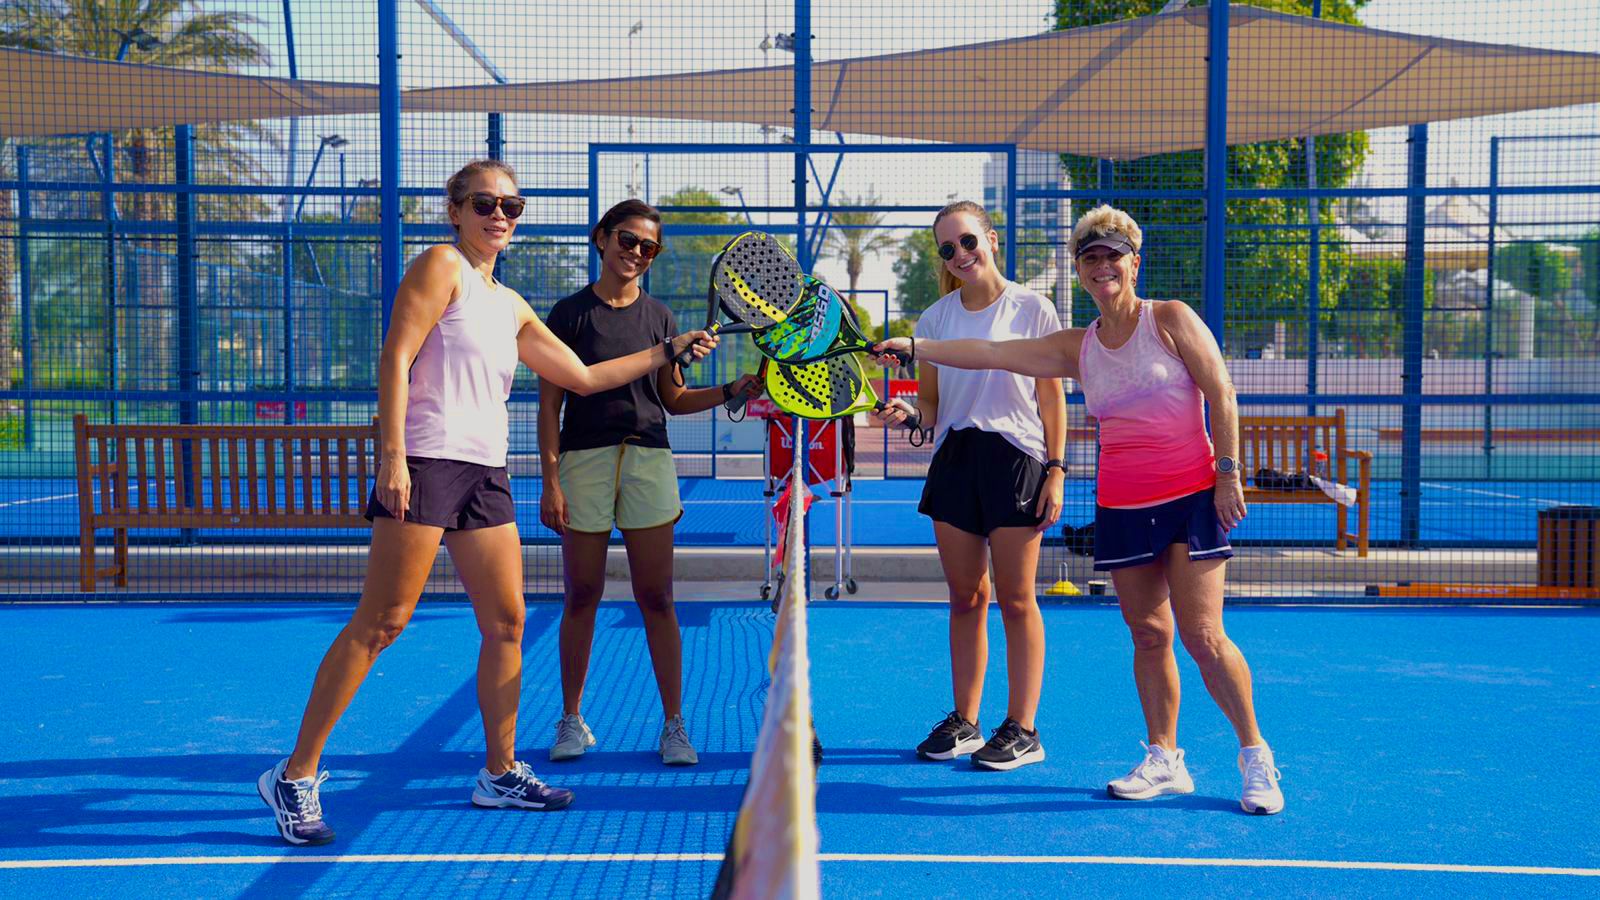  Padel Courts Dubai That Will Have You Swinging Your Best Shot